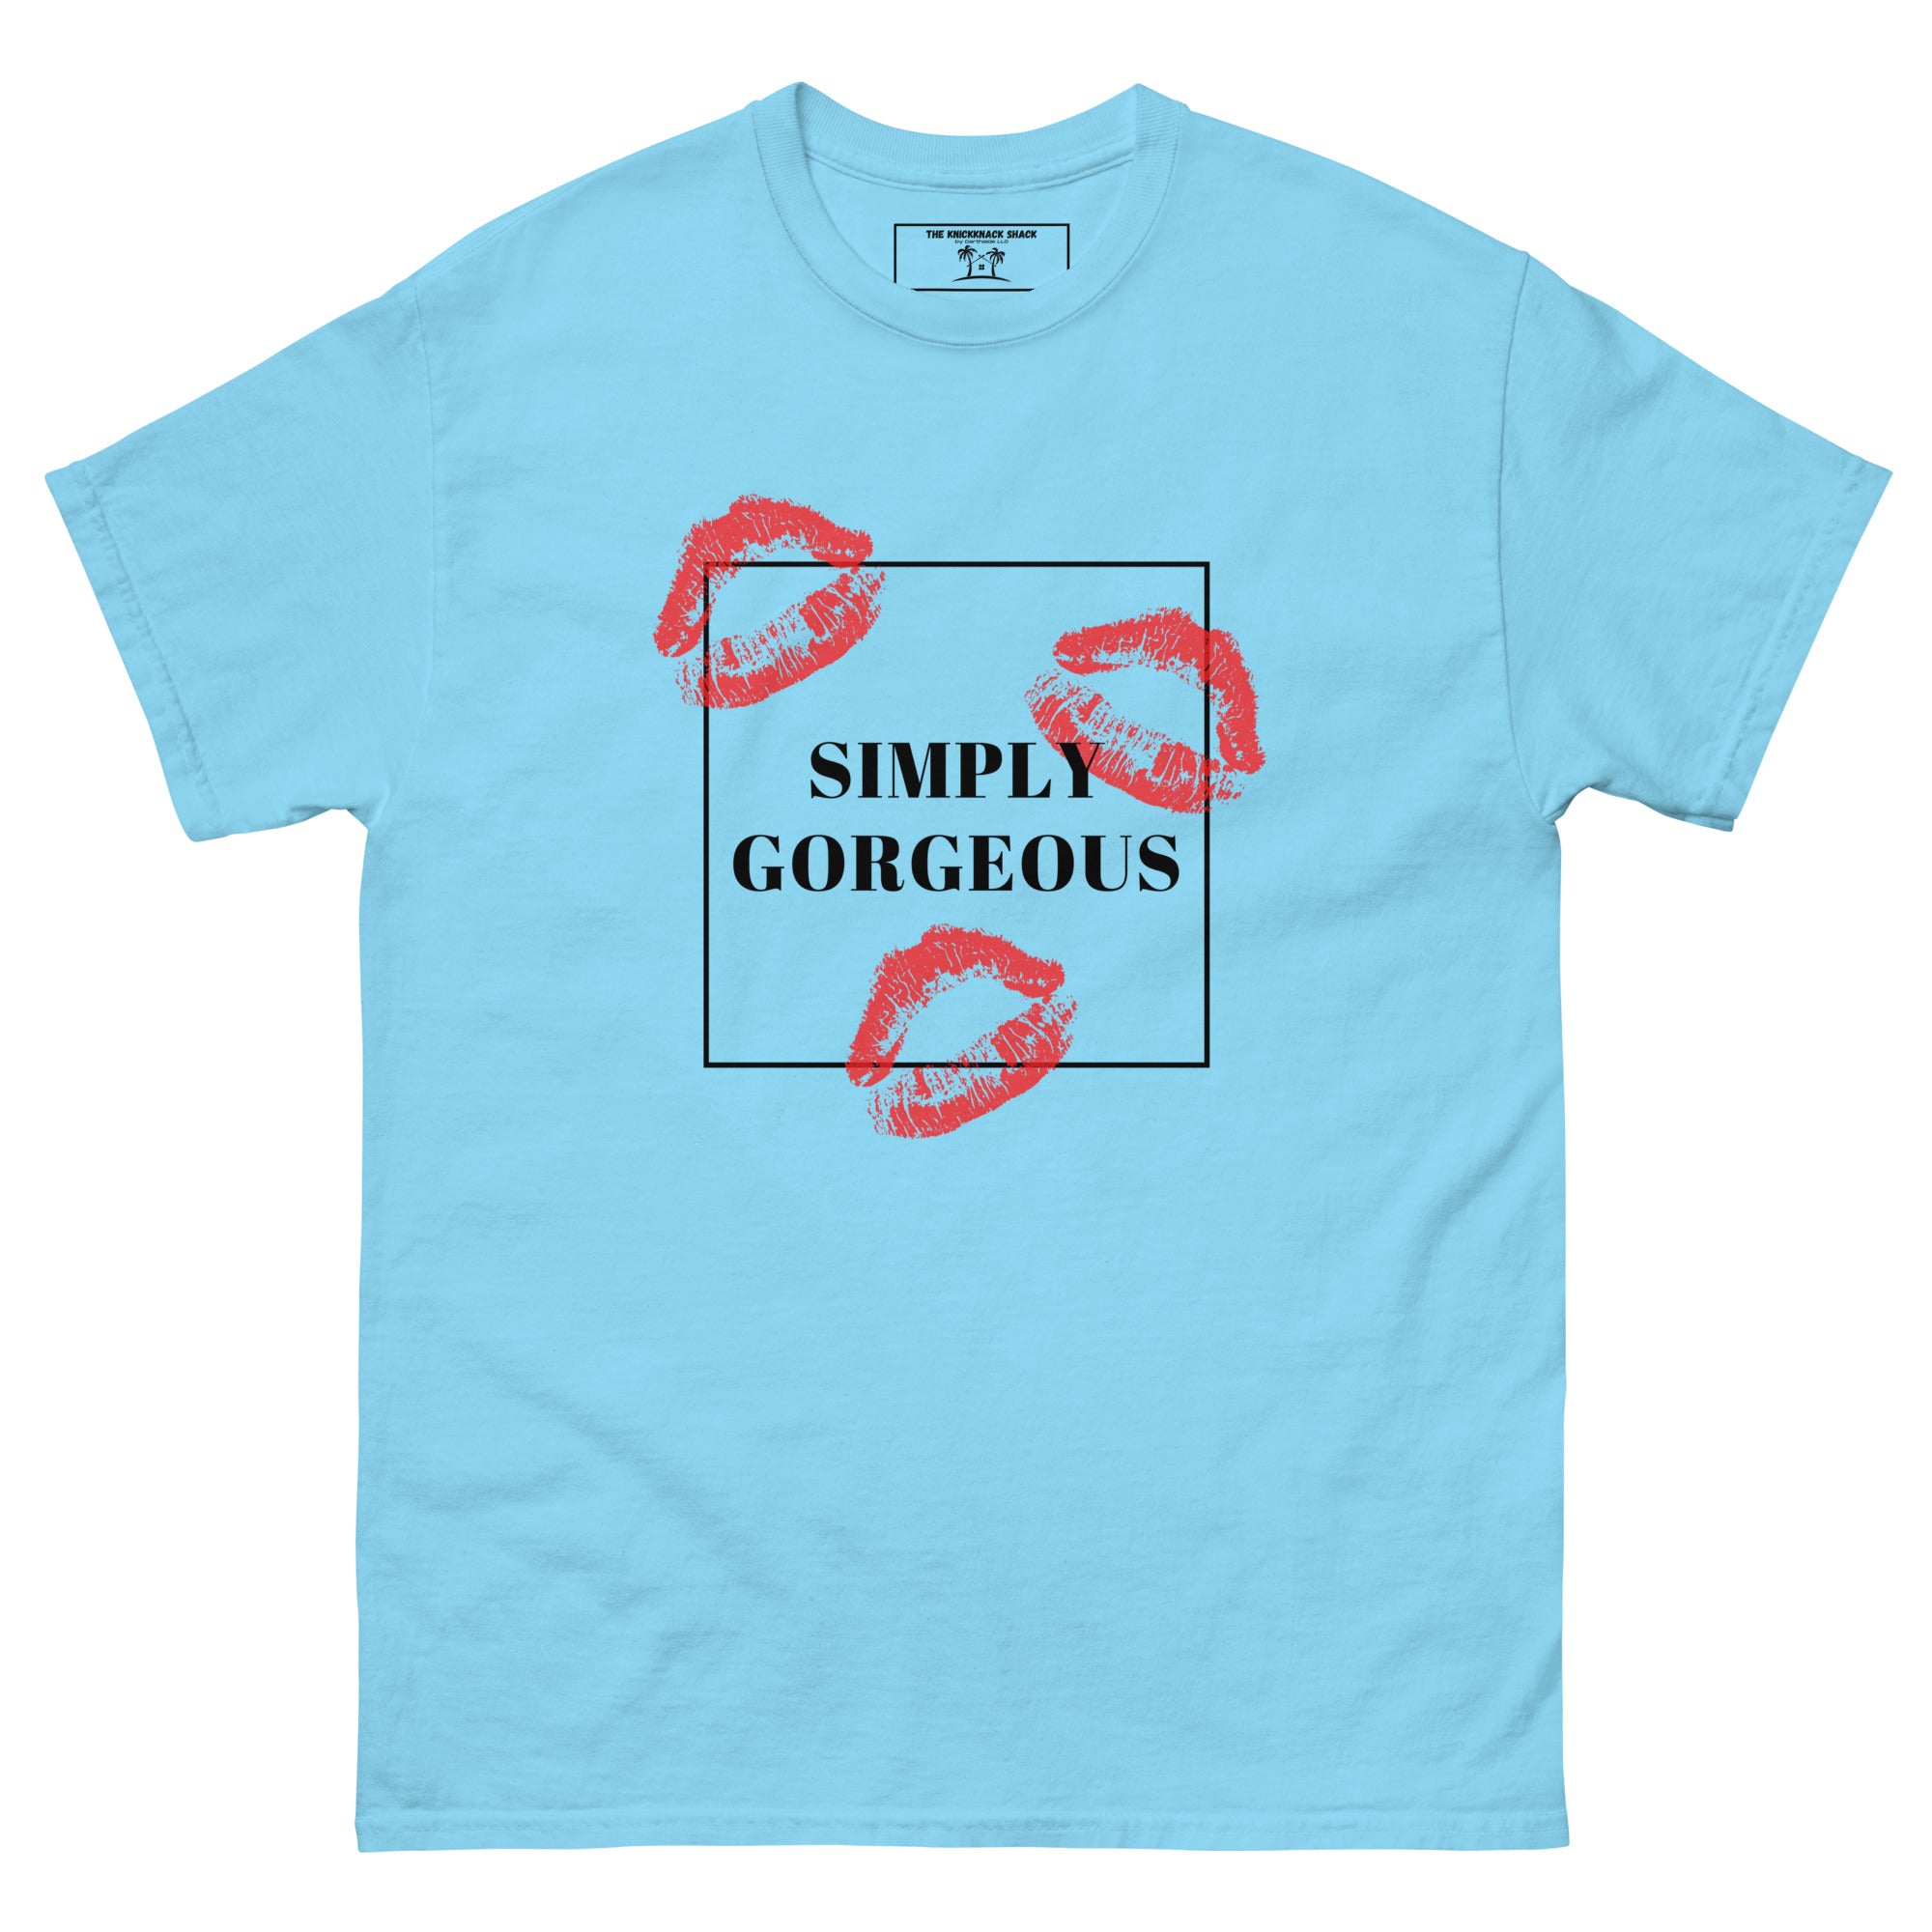 Classic Tee - Simply Gorgeous (Light Colors)